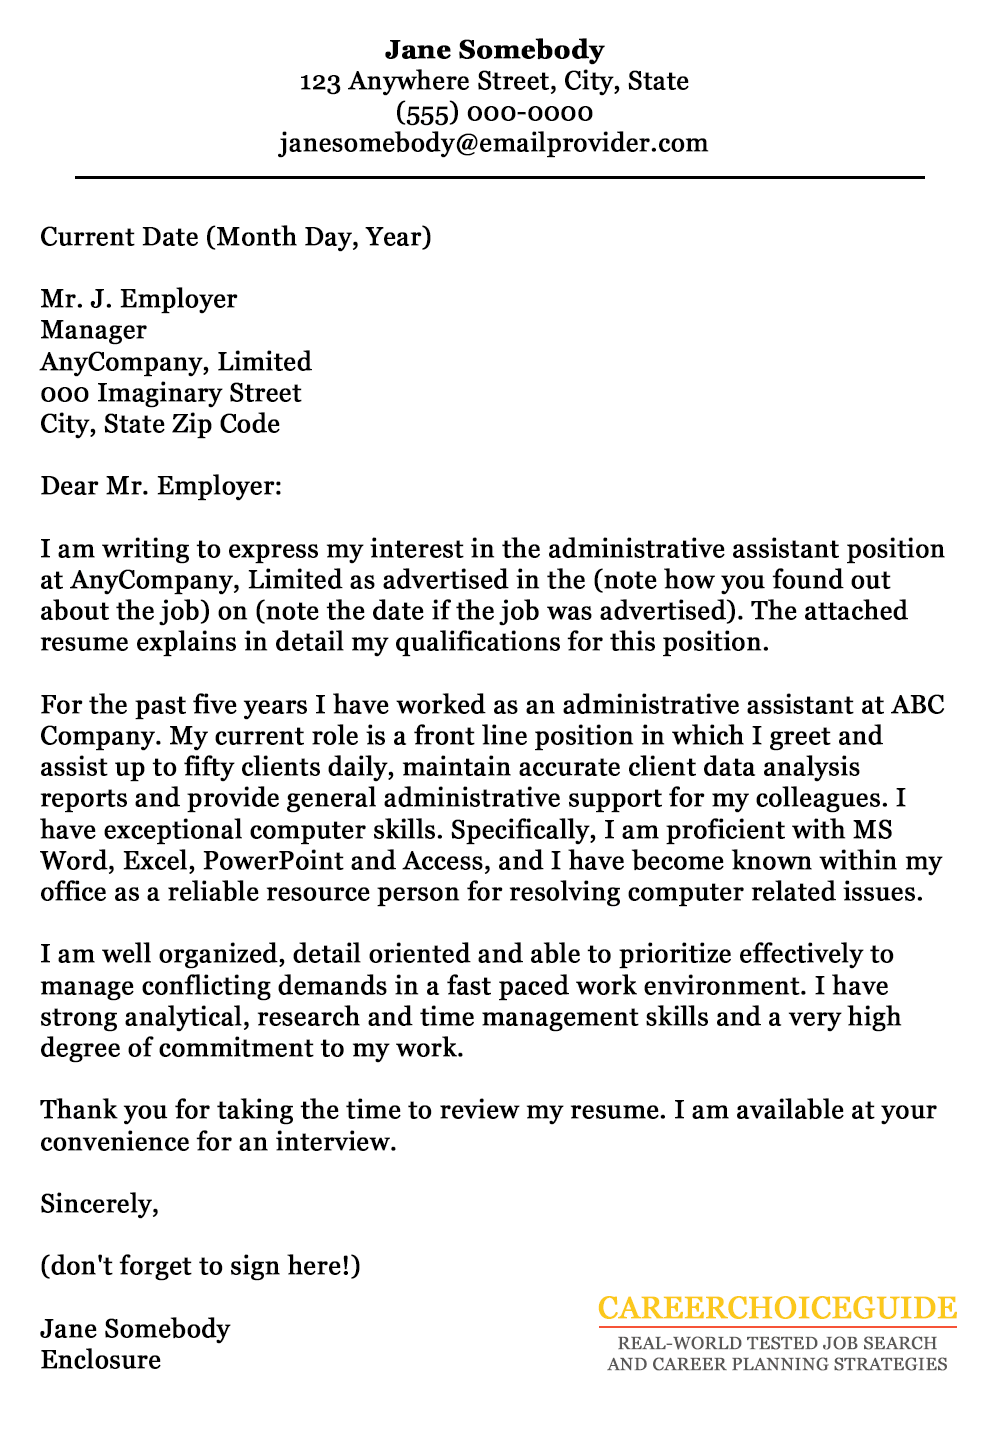 Administrative Cover Letter Sample from www.careerchoiceguide.com